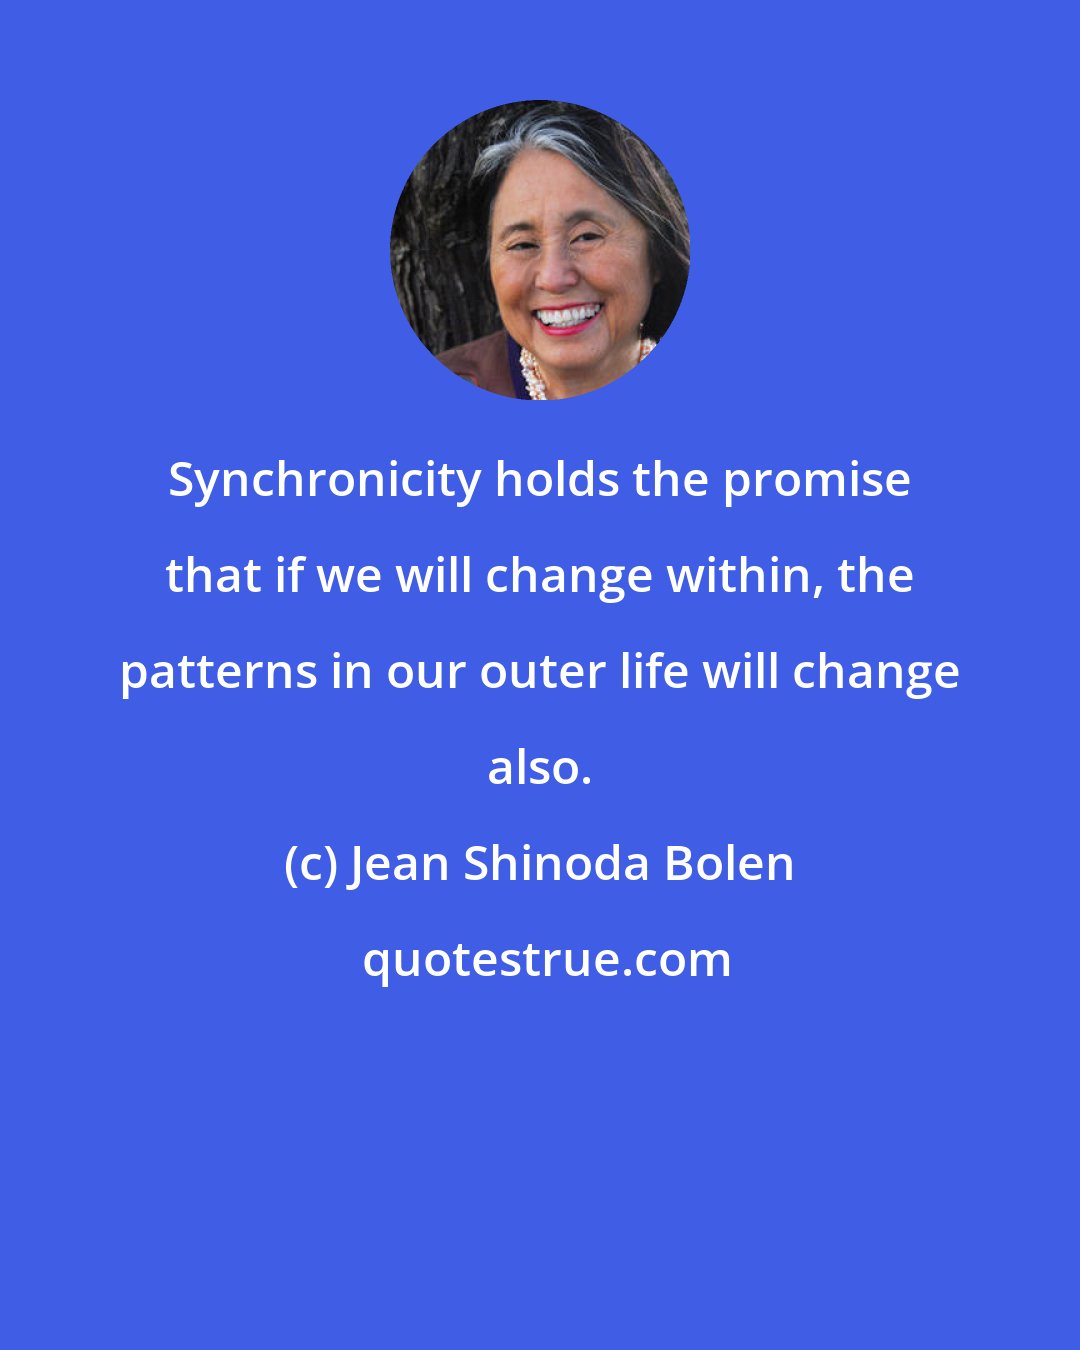 Jean Shinoda Bolen: Synchronicity holds the promise that if we will change within, the patterns in our outer life will change also.